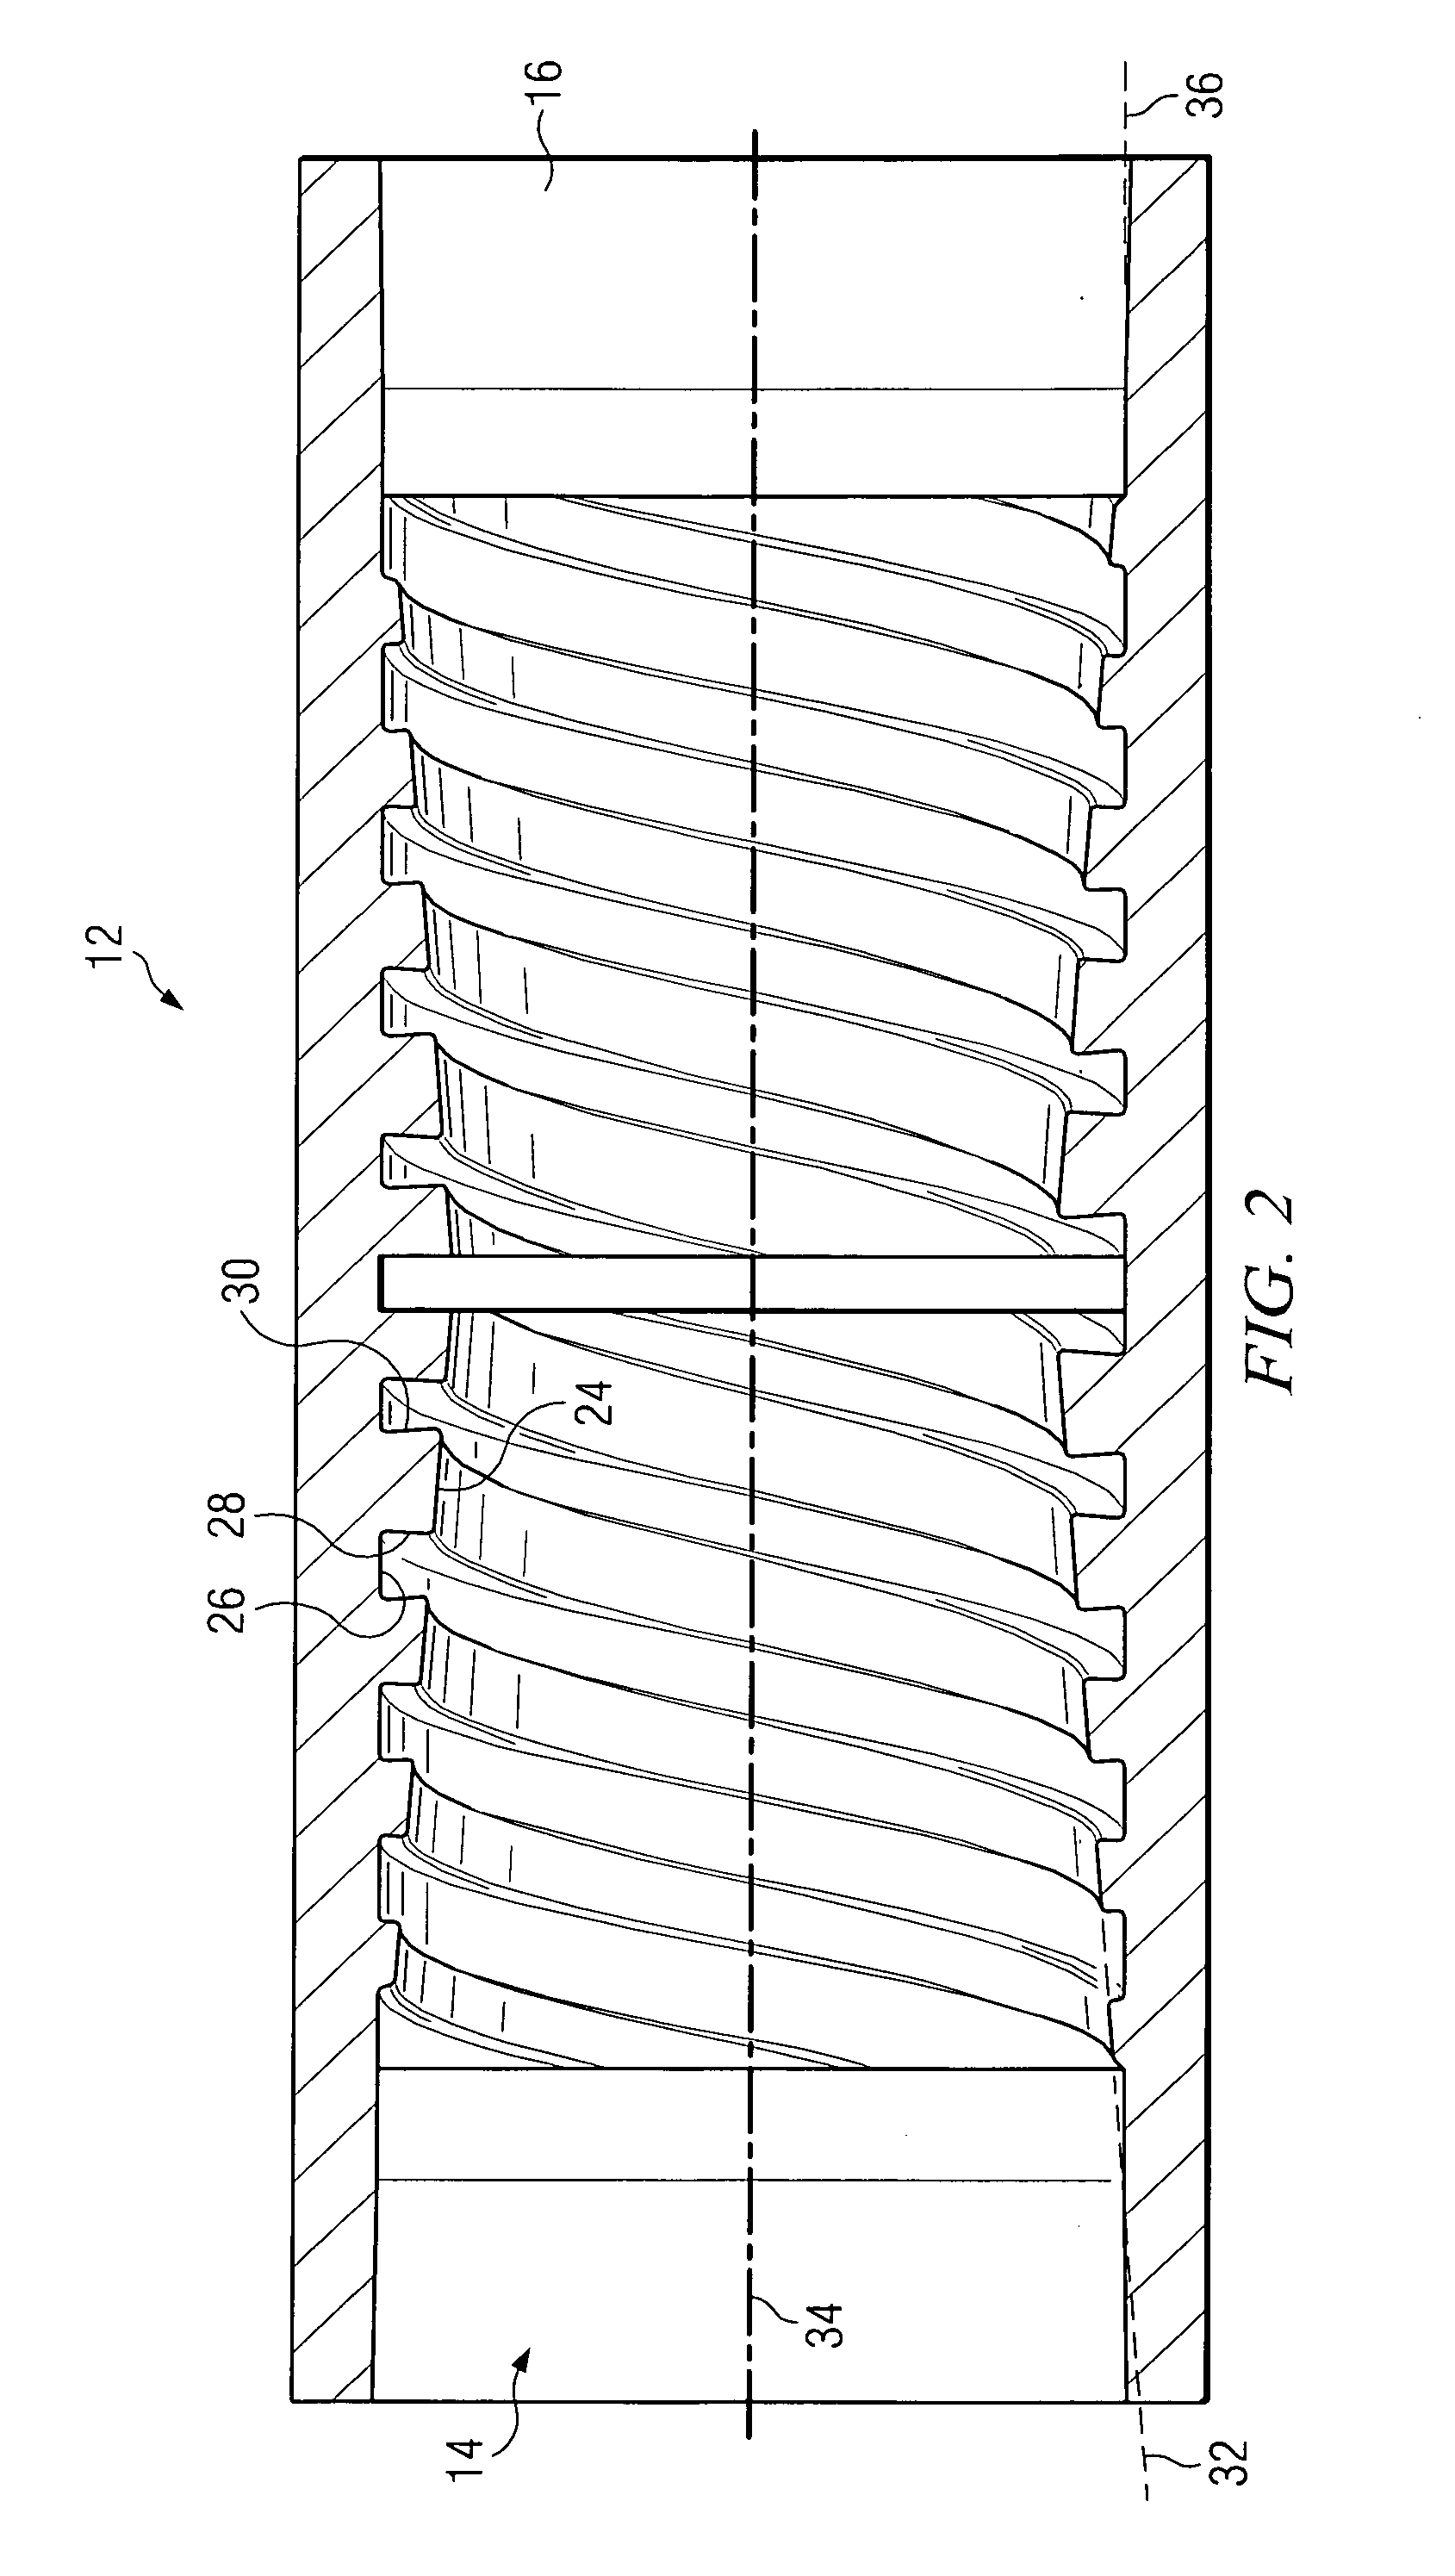 Cylindrical Tapered Thread Form for Tubular Connections